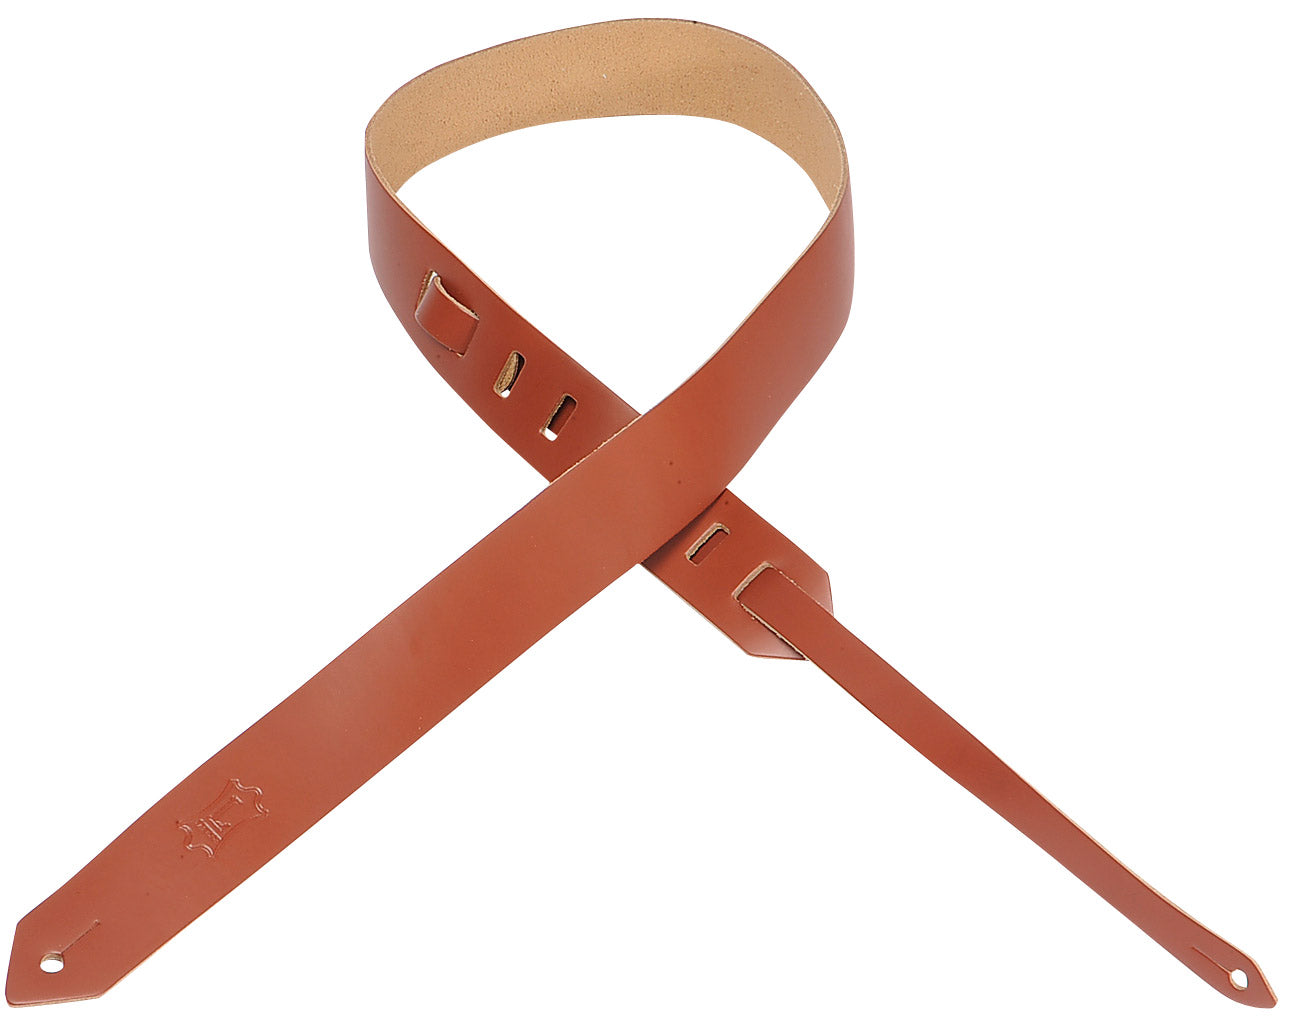 LEVY'S 1 1/2" LEATHER GUITAR STRAP - WALNUT